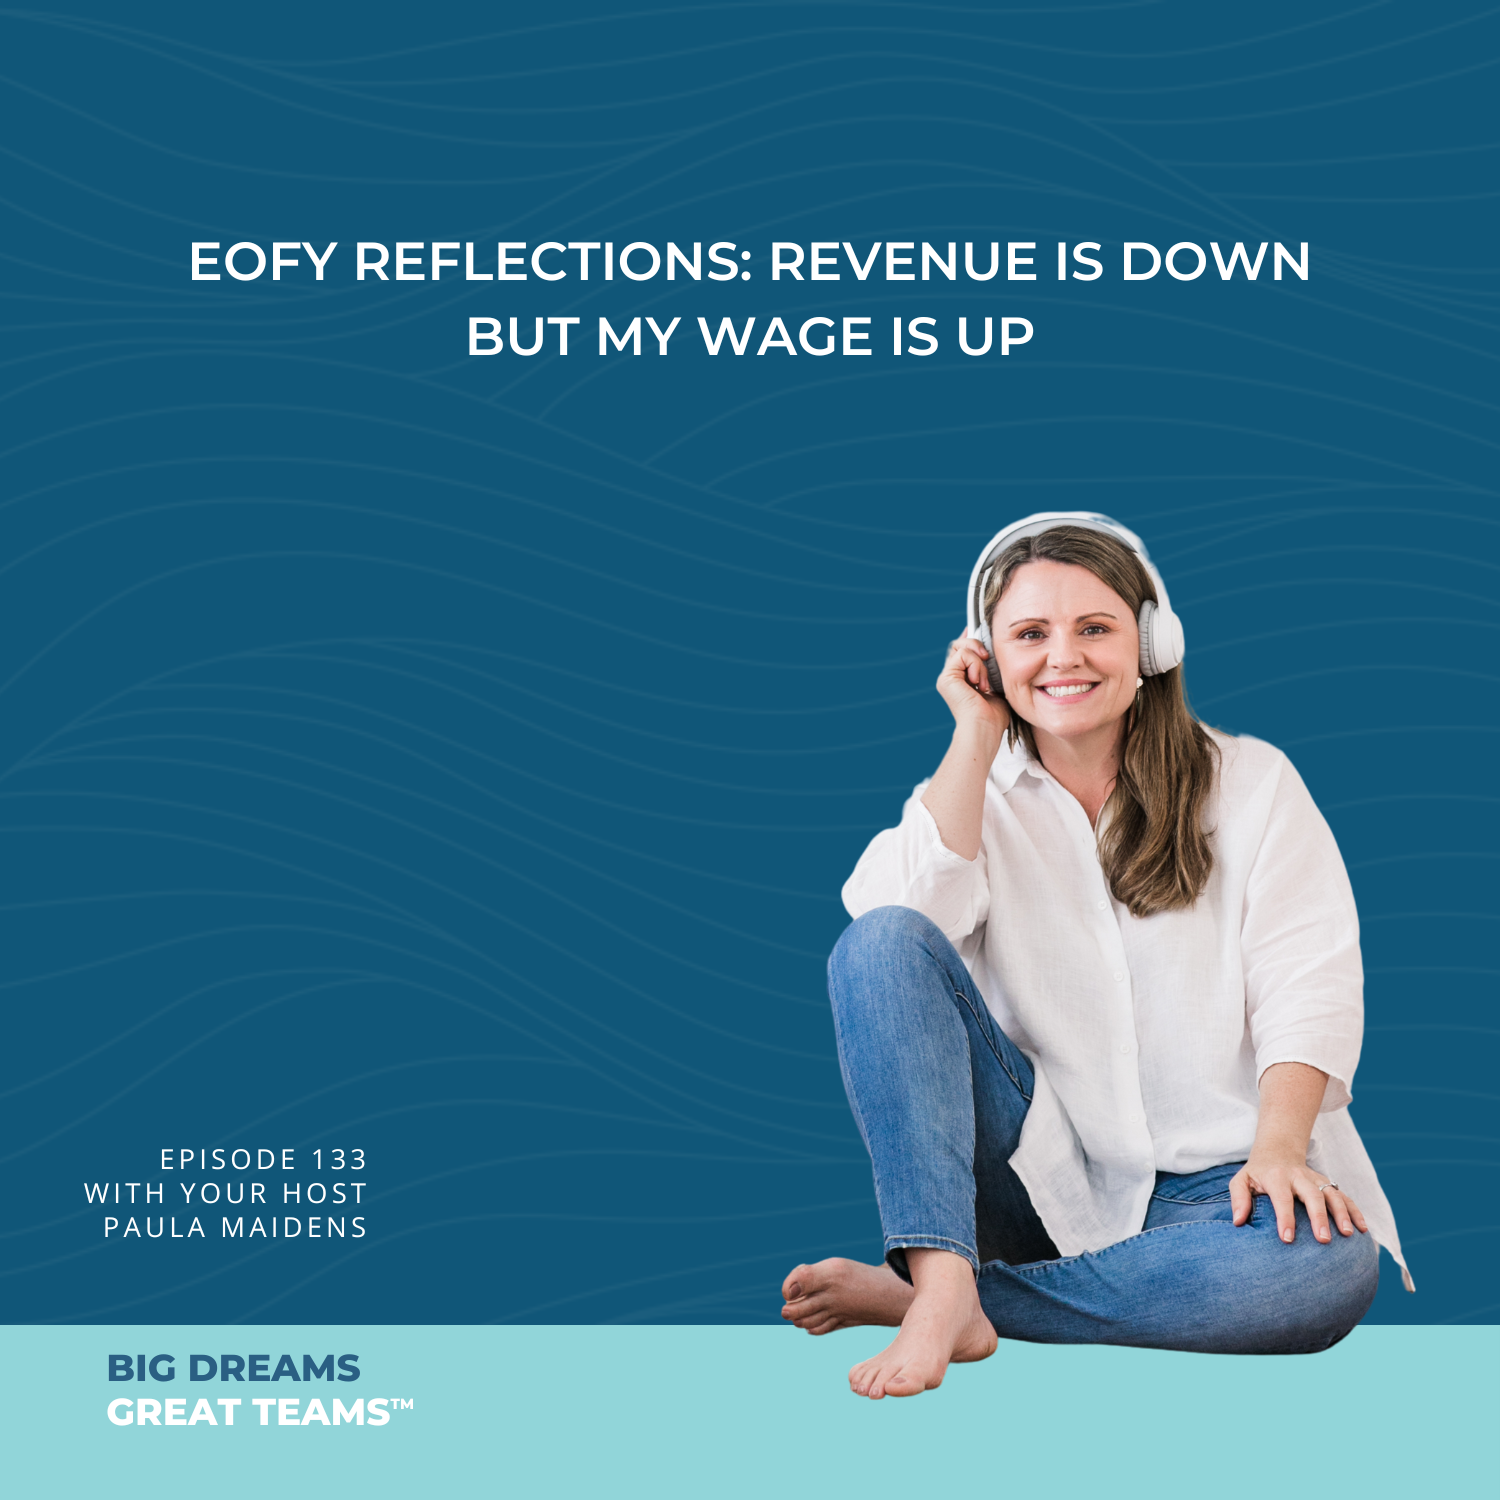 Episode 133 - EOFY Reflections: Revenue is down but my WAGE IS UP